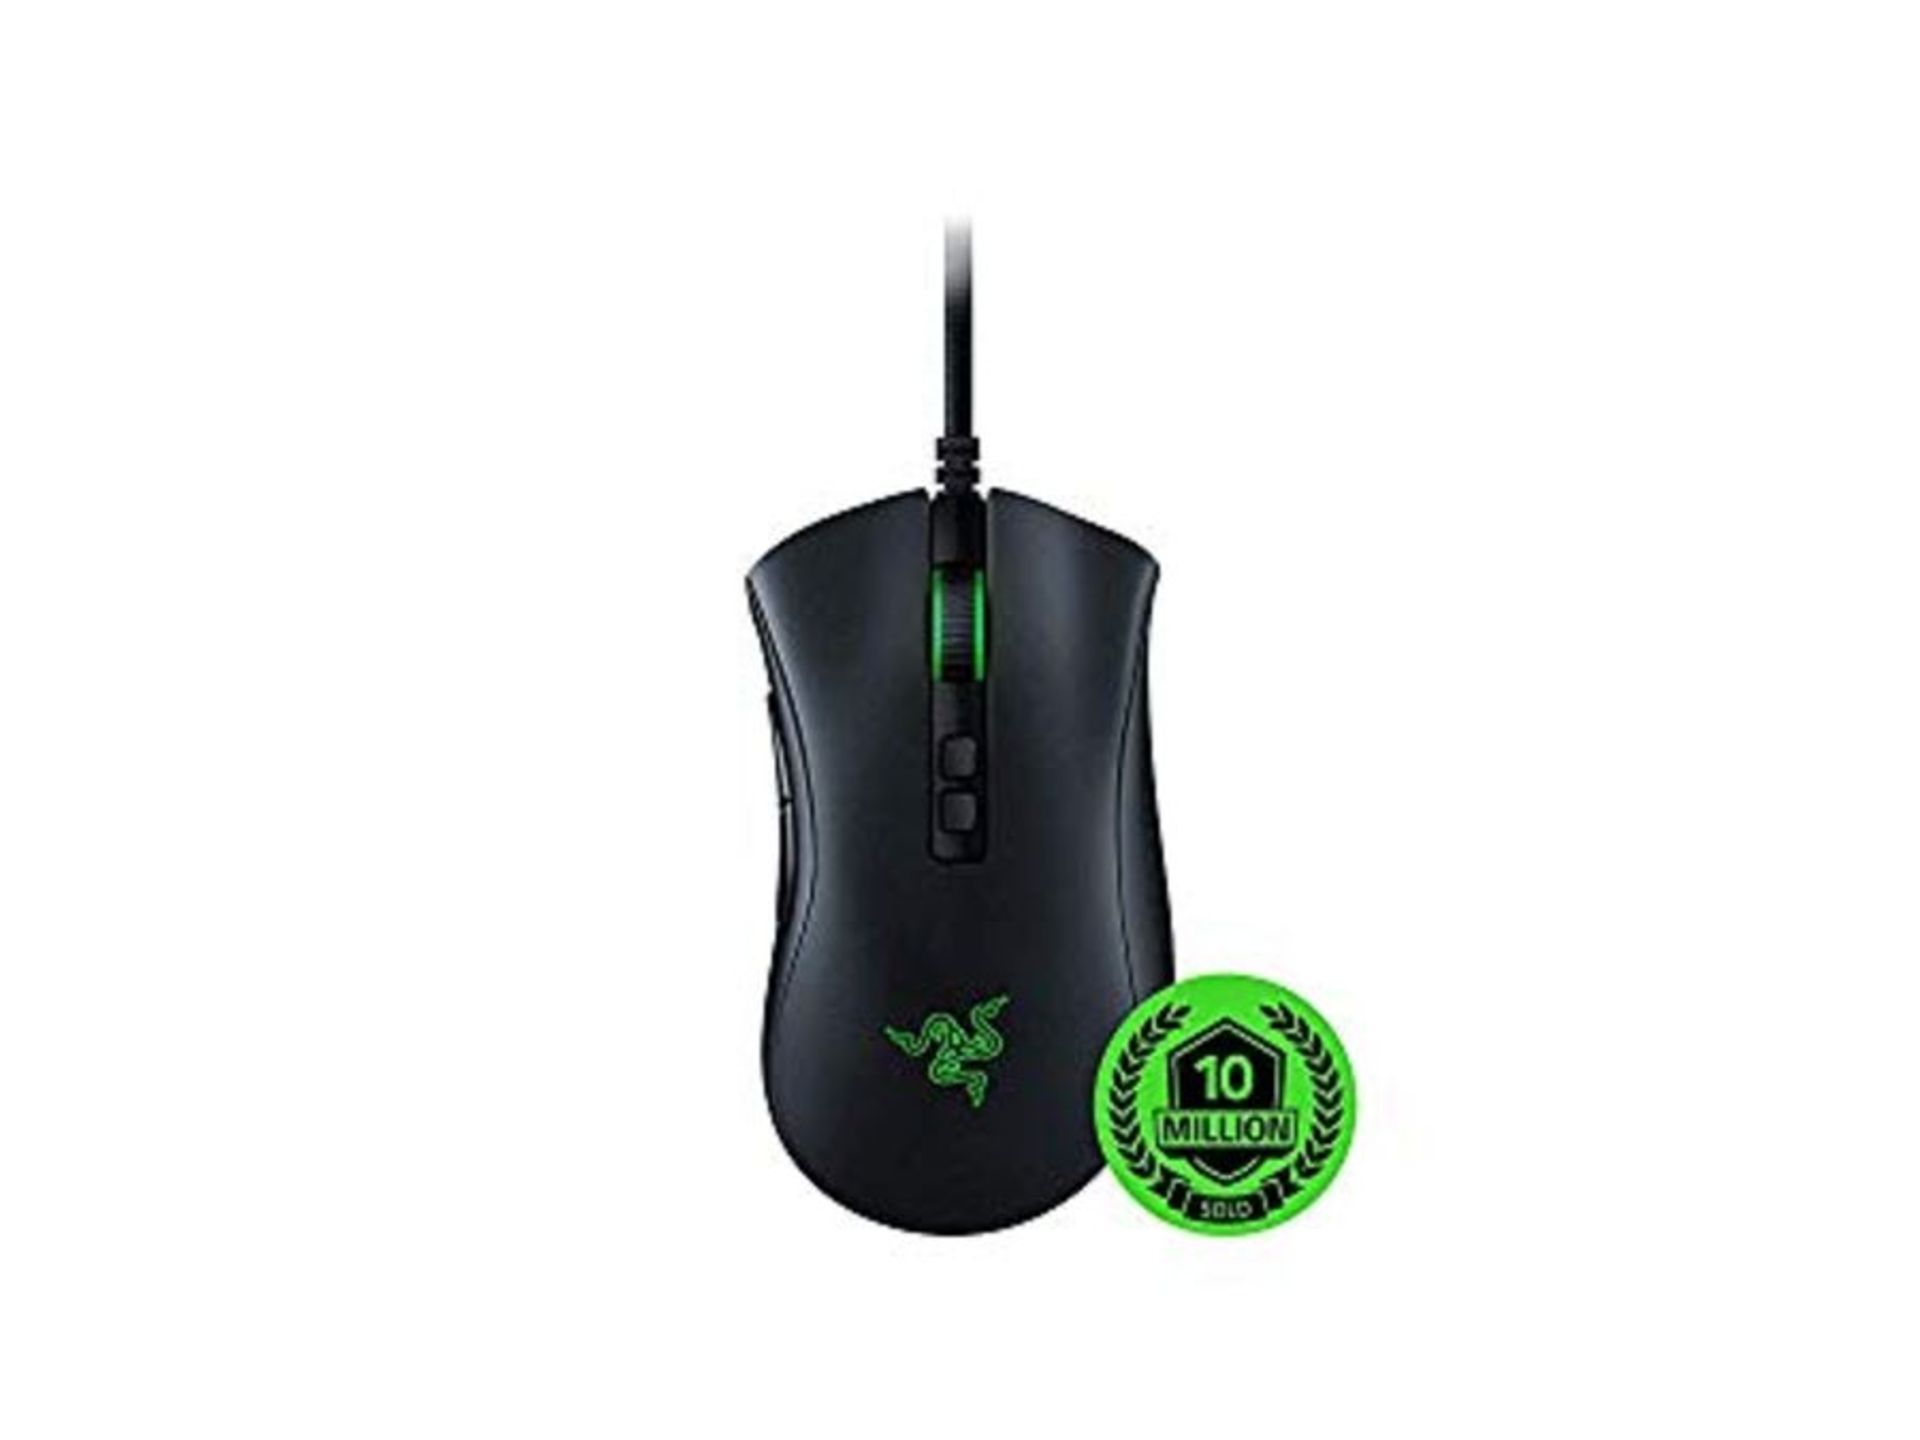 Razer DeathAdder V2 - Wired USB Gaming Mouse with Optical Mouse Switches